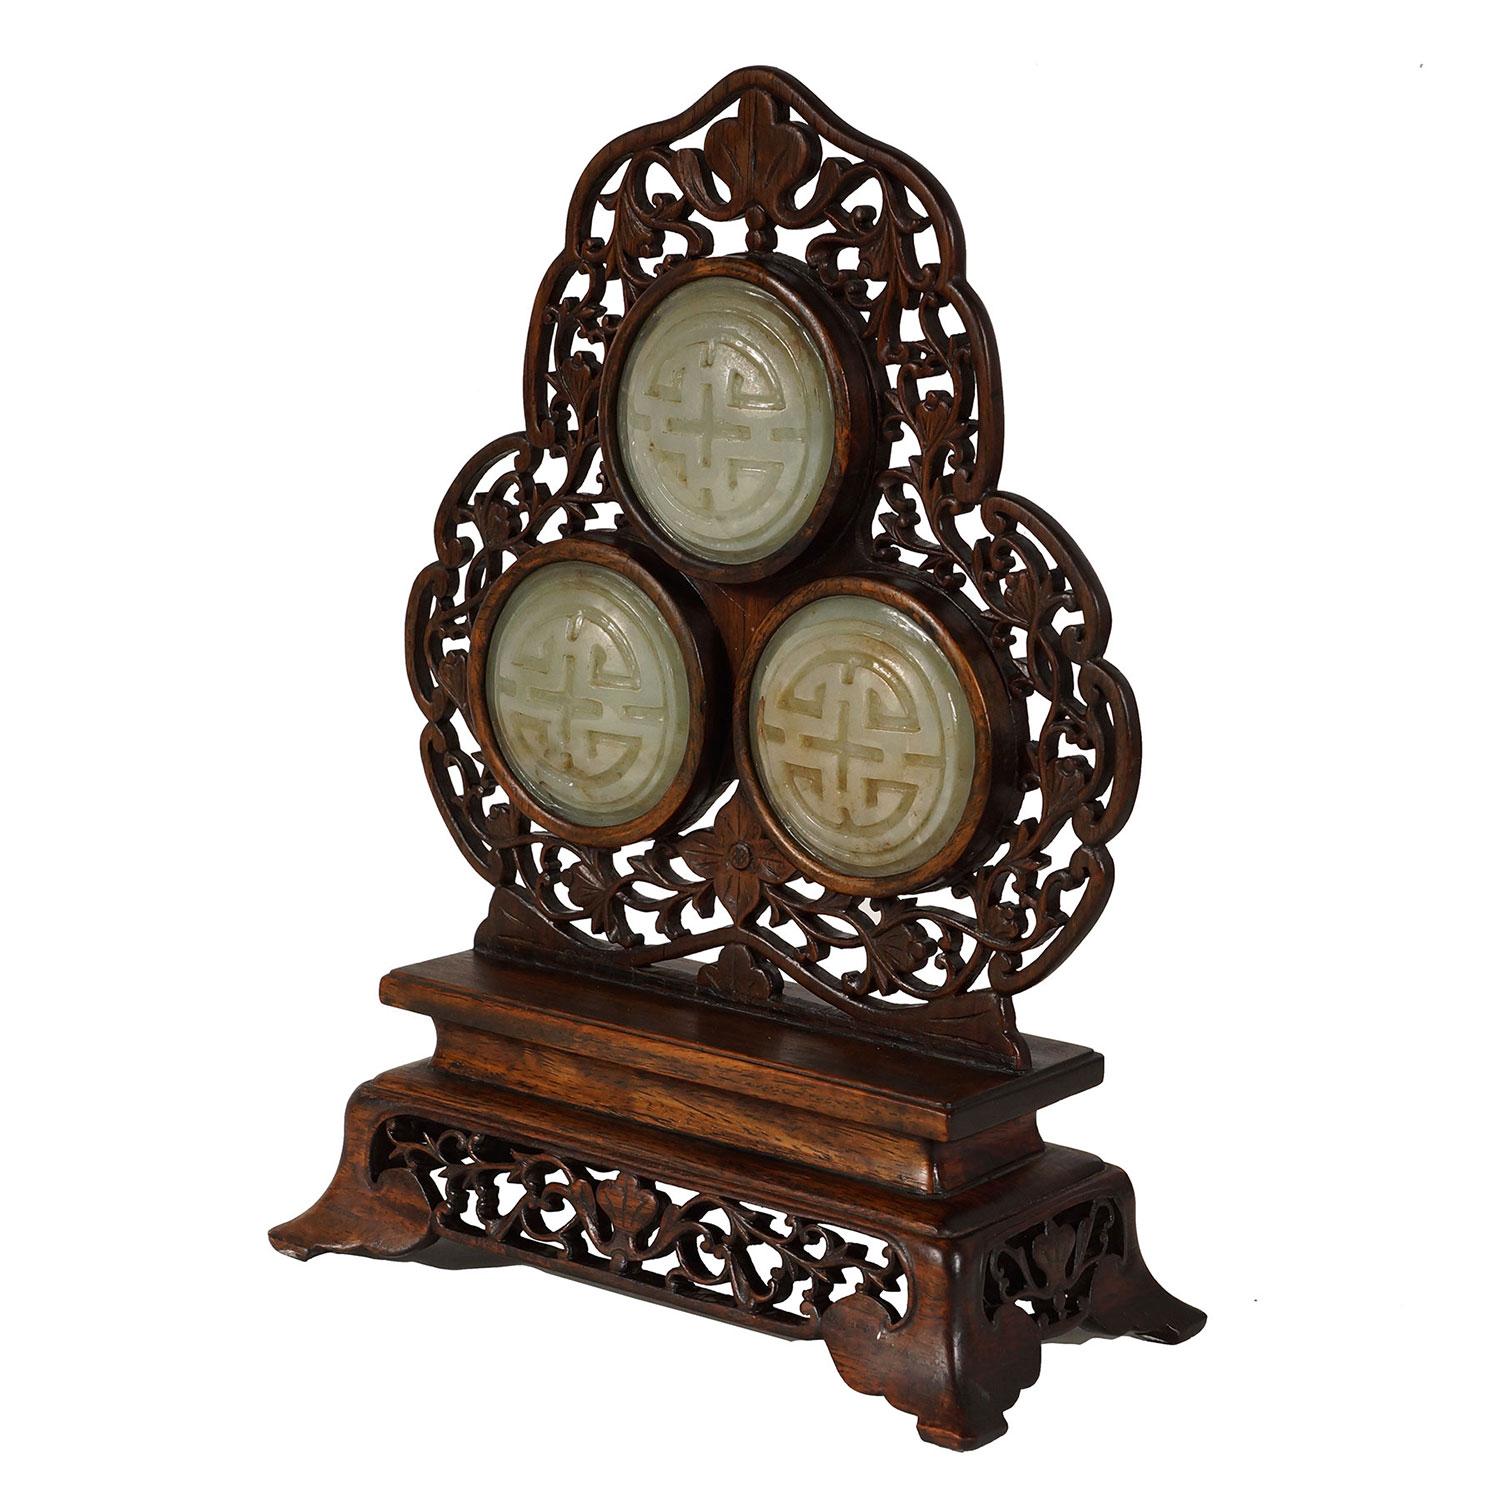 Look at this beautiful Chinese antique Rosewood decorated table screen. It is 100 percent hand made and hand carved with Jade carving insert at center of the screen. Very detailed fine wood working piece. Look at the detailed pictures, you can see